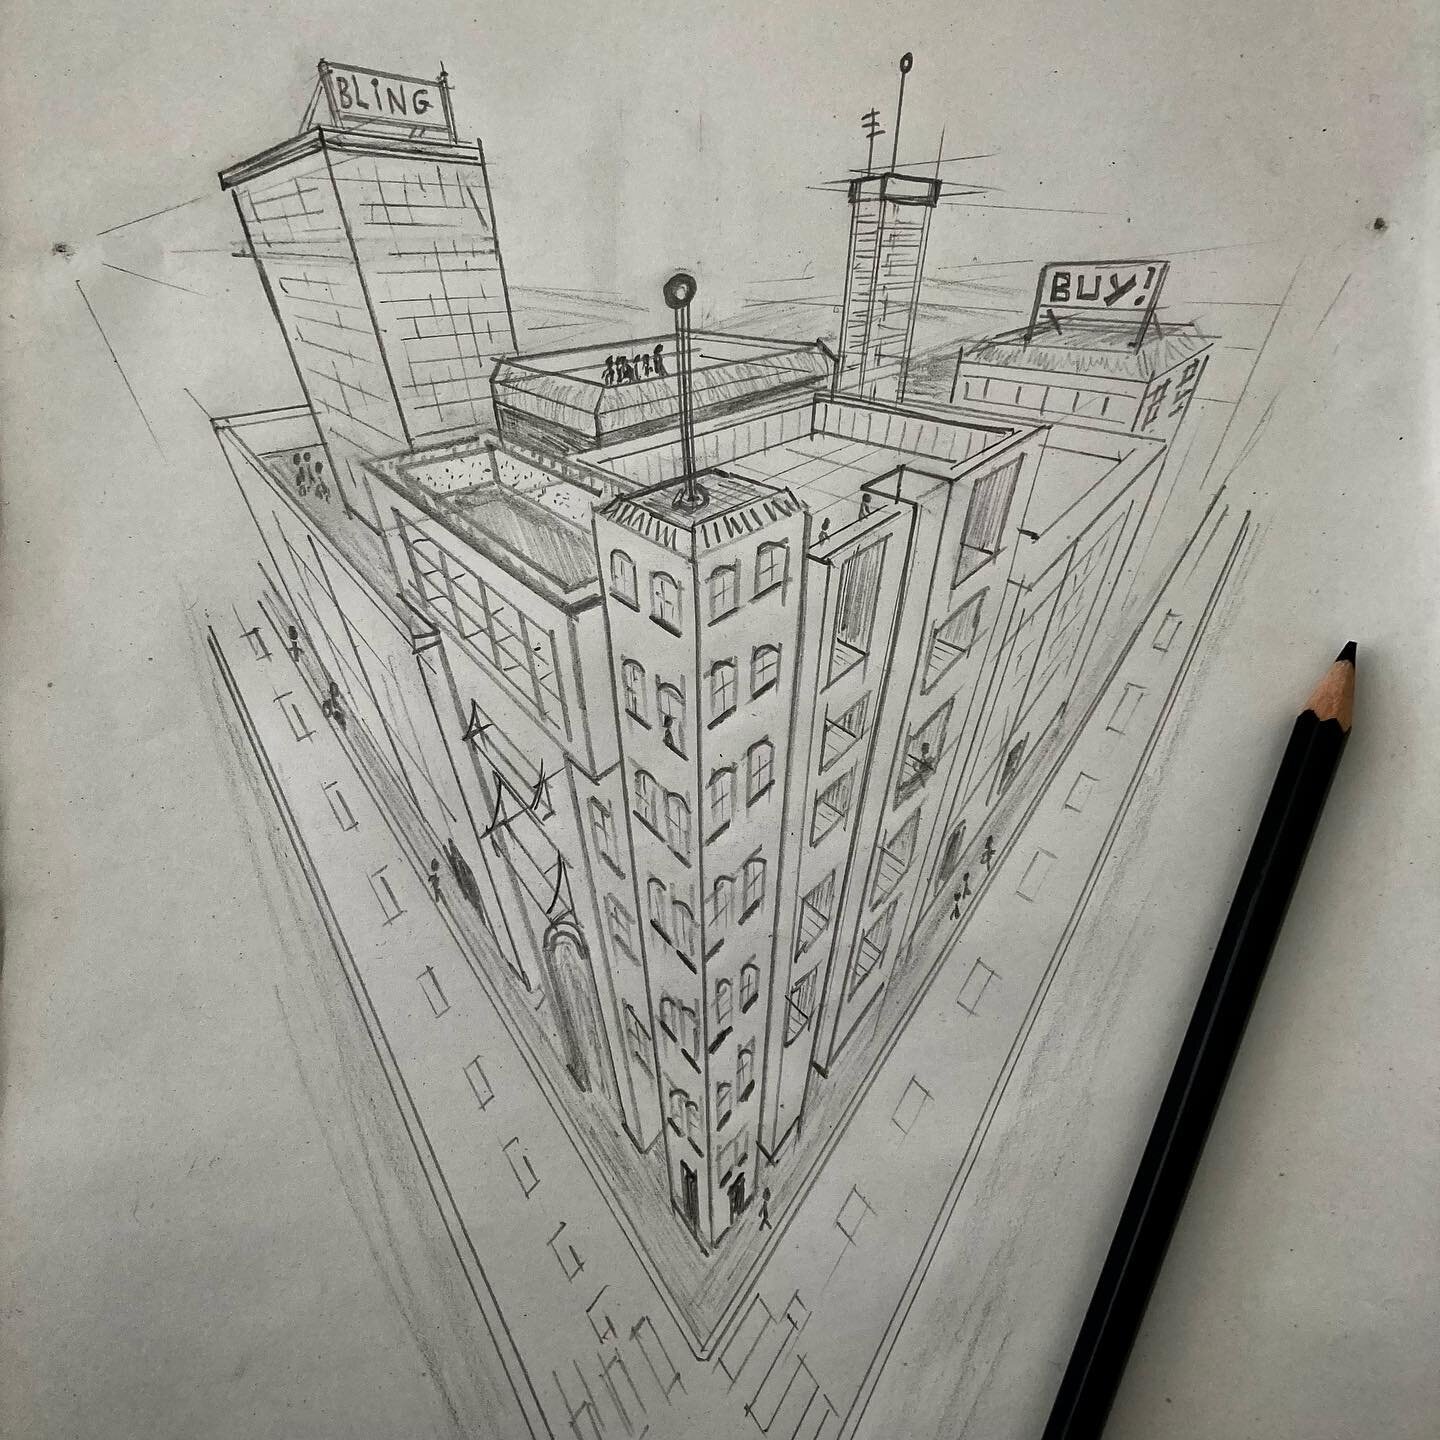 Reference points.
.
.
I tried my hand at some 3point #perspective cause I want to make some furniture sketches. But first we start bigger, like with a city for example:) #drawing #3ppp